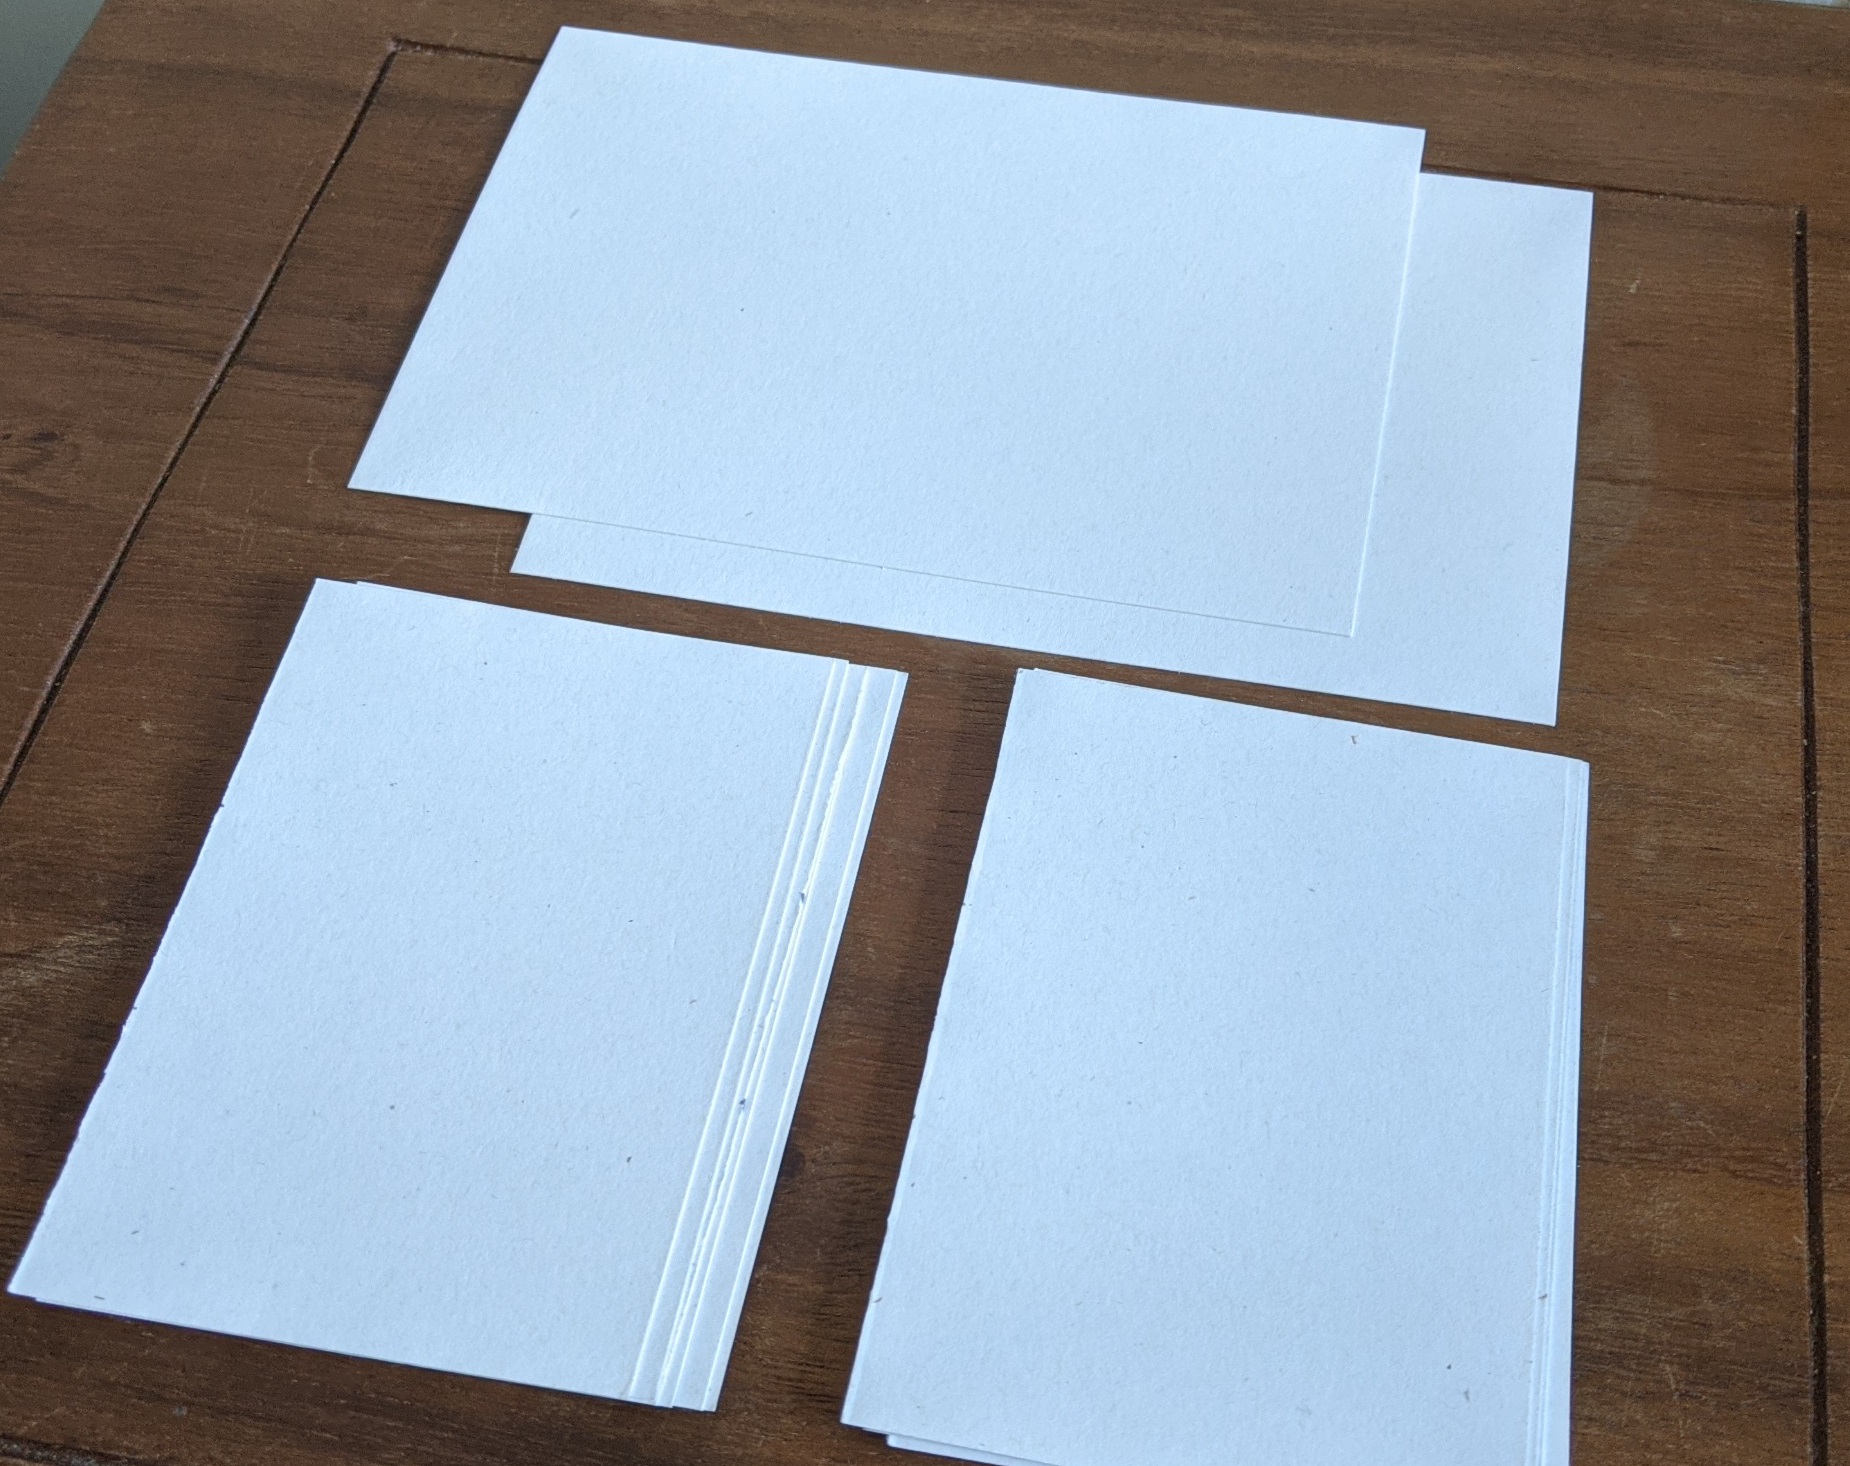 pieces of paper, cut in 2 even halves